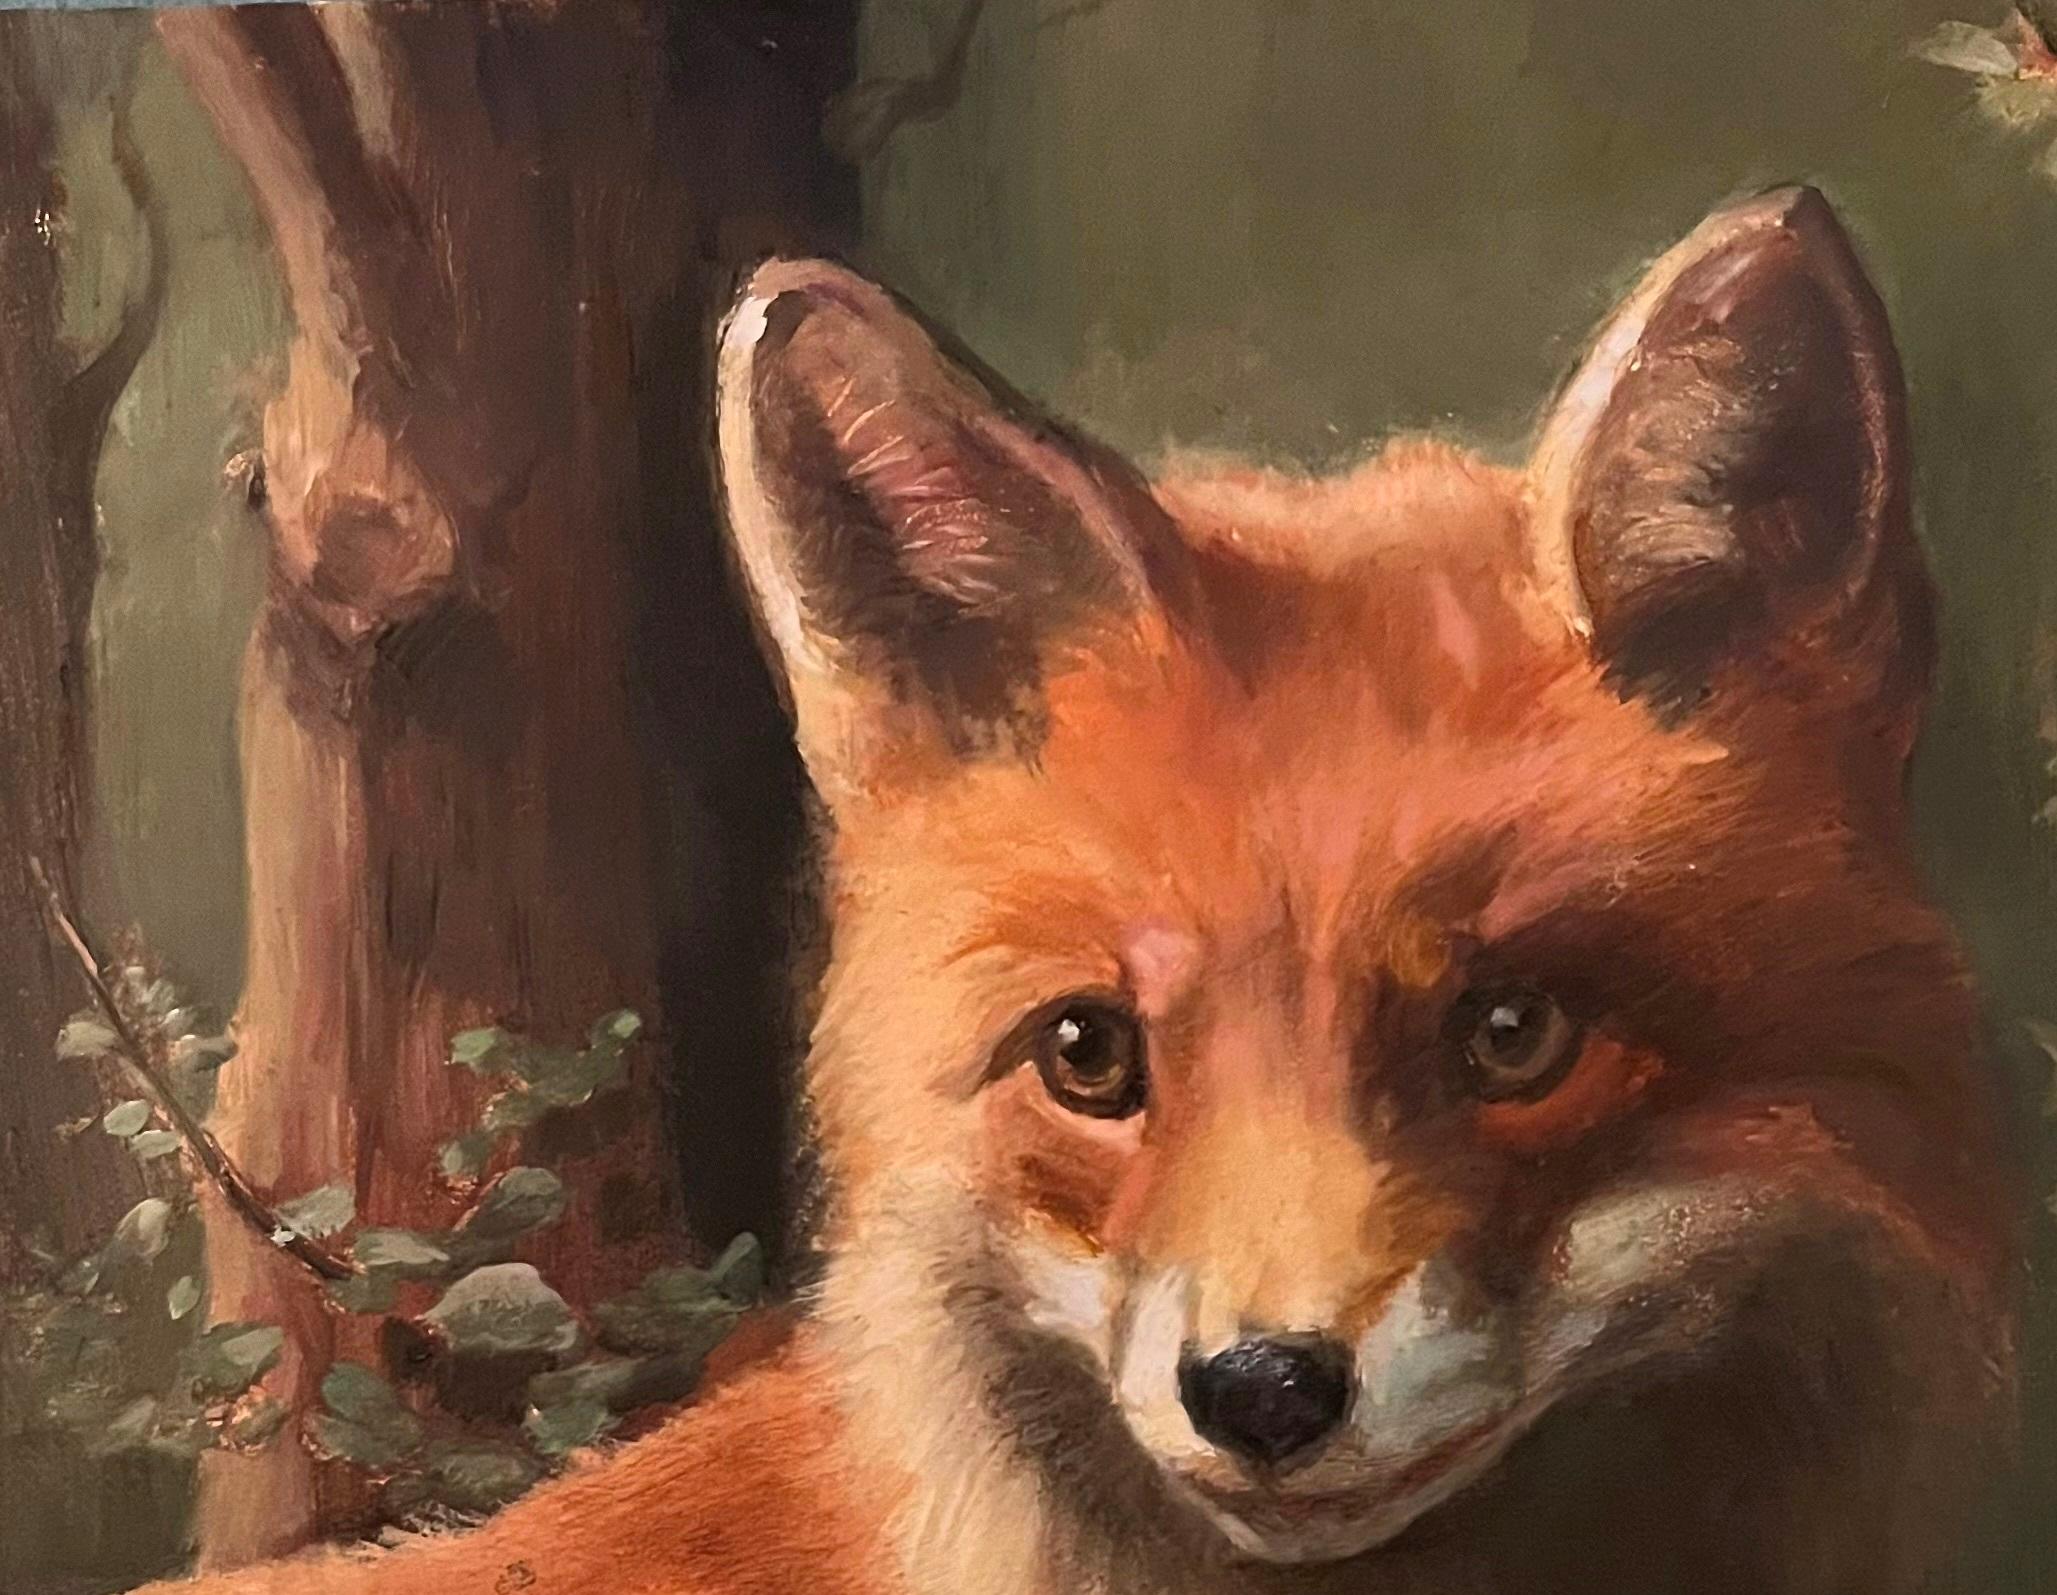 Enchanting Fox Poised Alertly Amidst a Landscape of Woodland Serenity - Realist Painting by Valarie Wolf